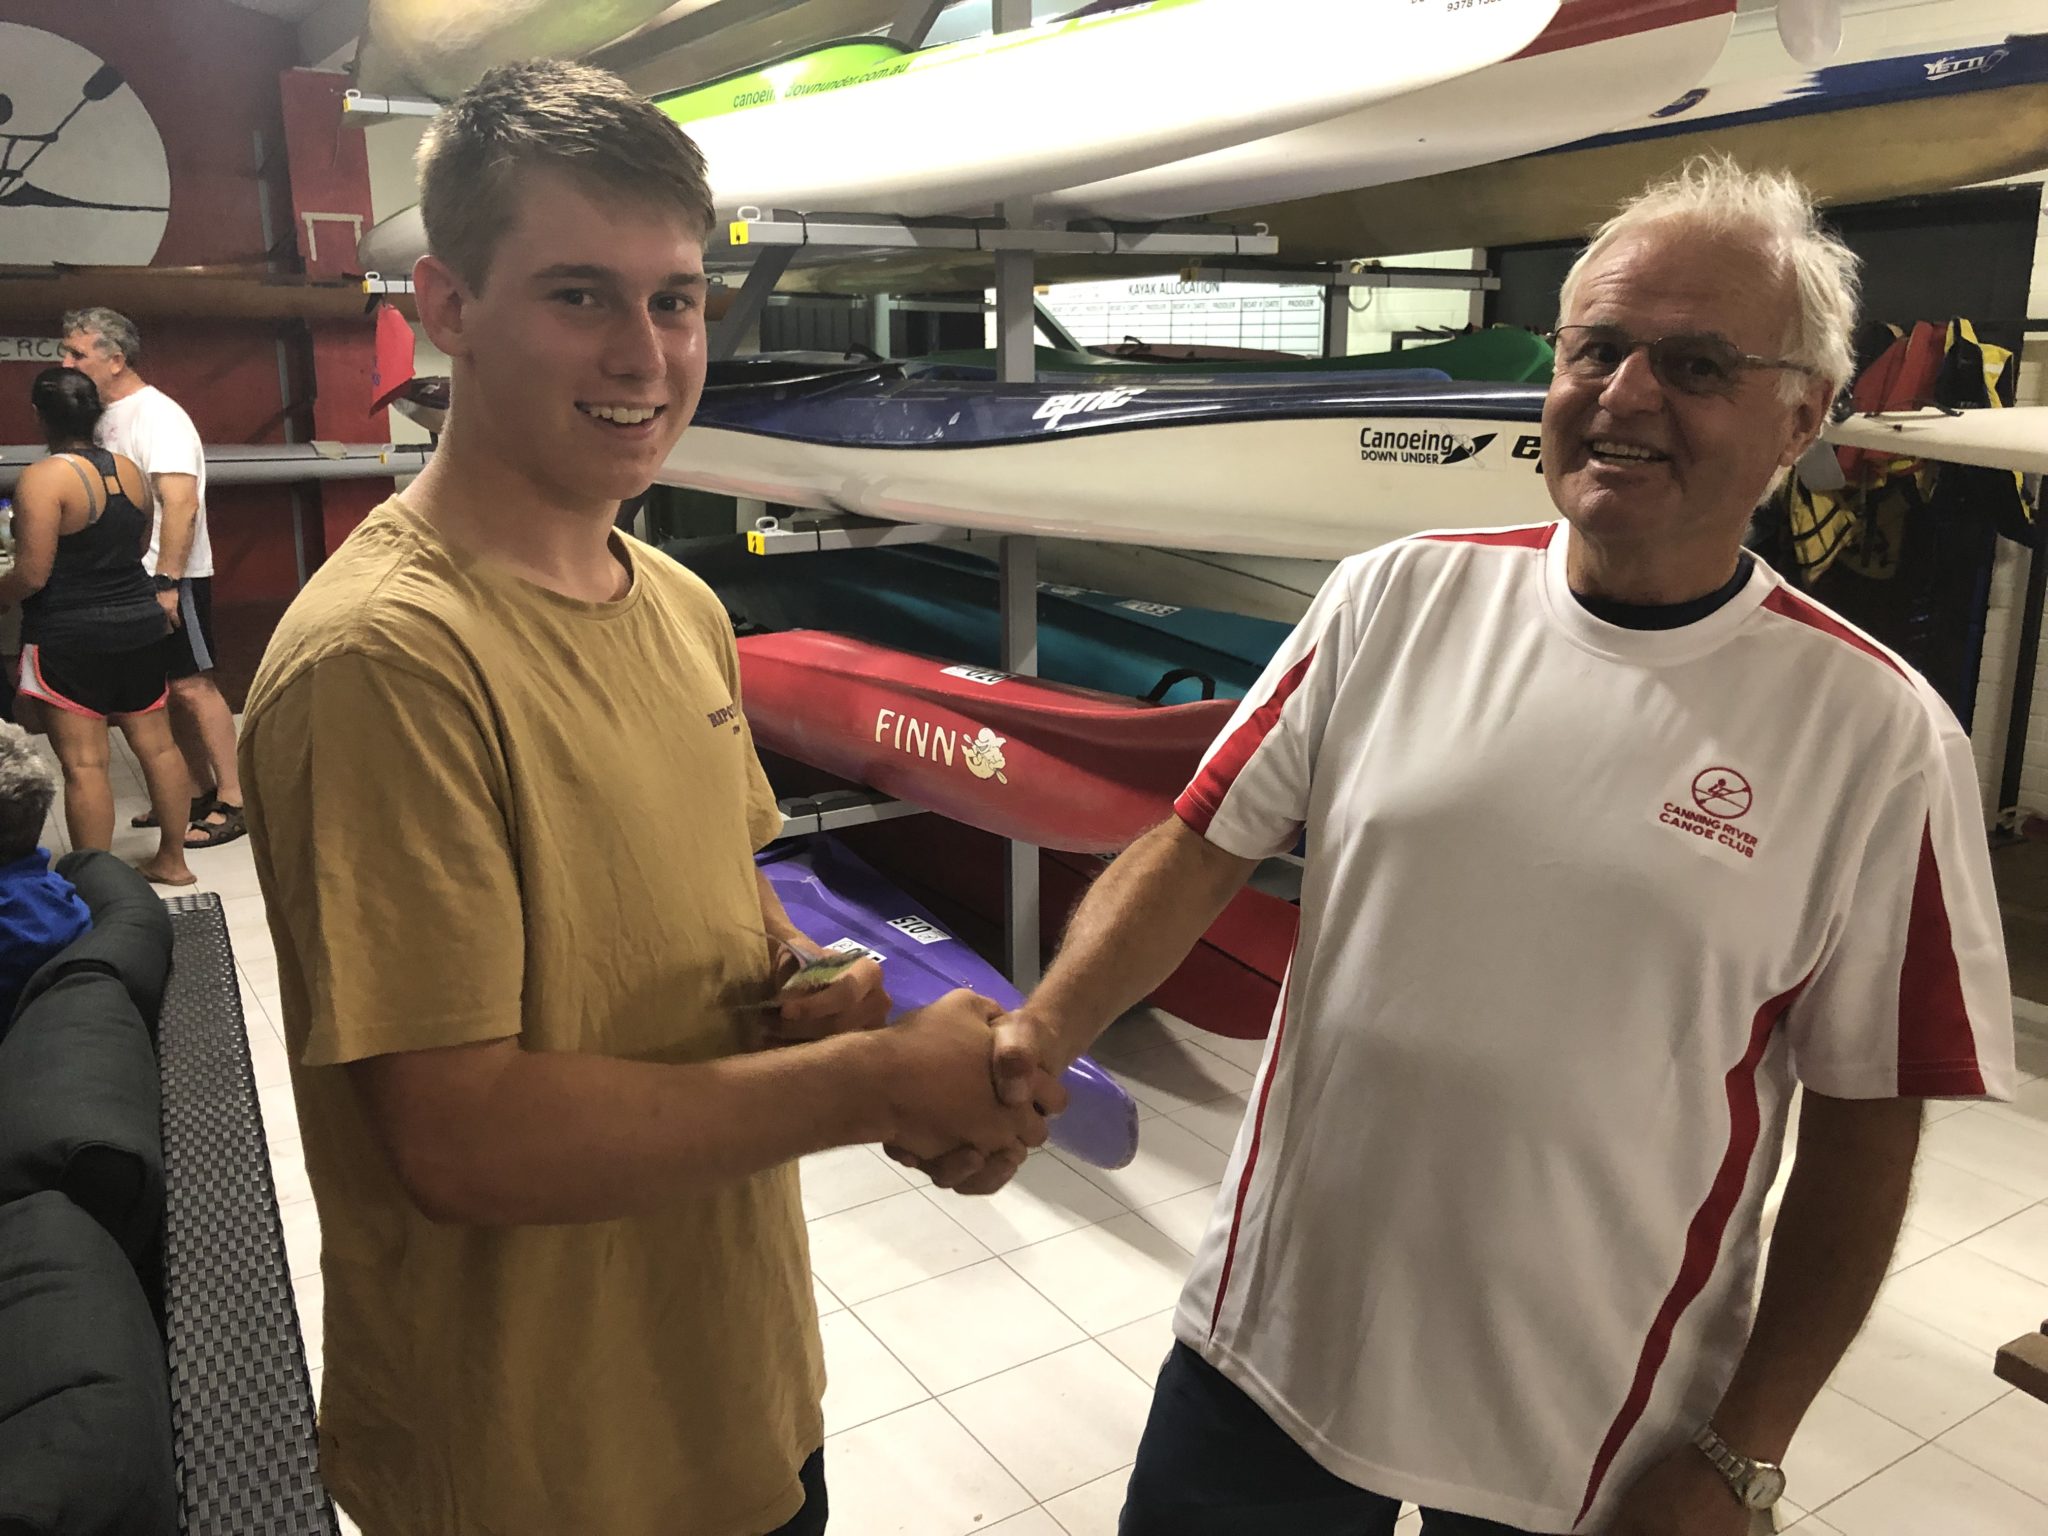 Tuesday 22nd January 2019 : Tonight’s photo shows club member Les Siemens presenting Tom Green with hard cash in preference to a movie voucher.